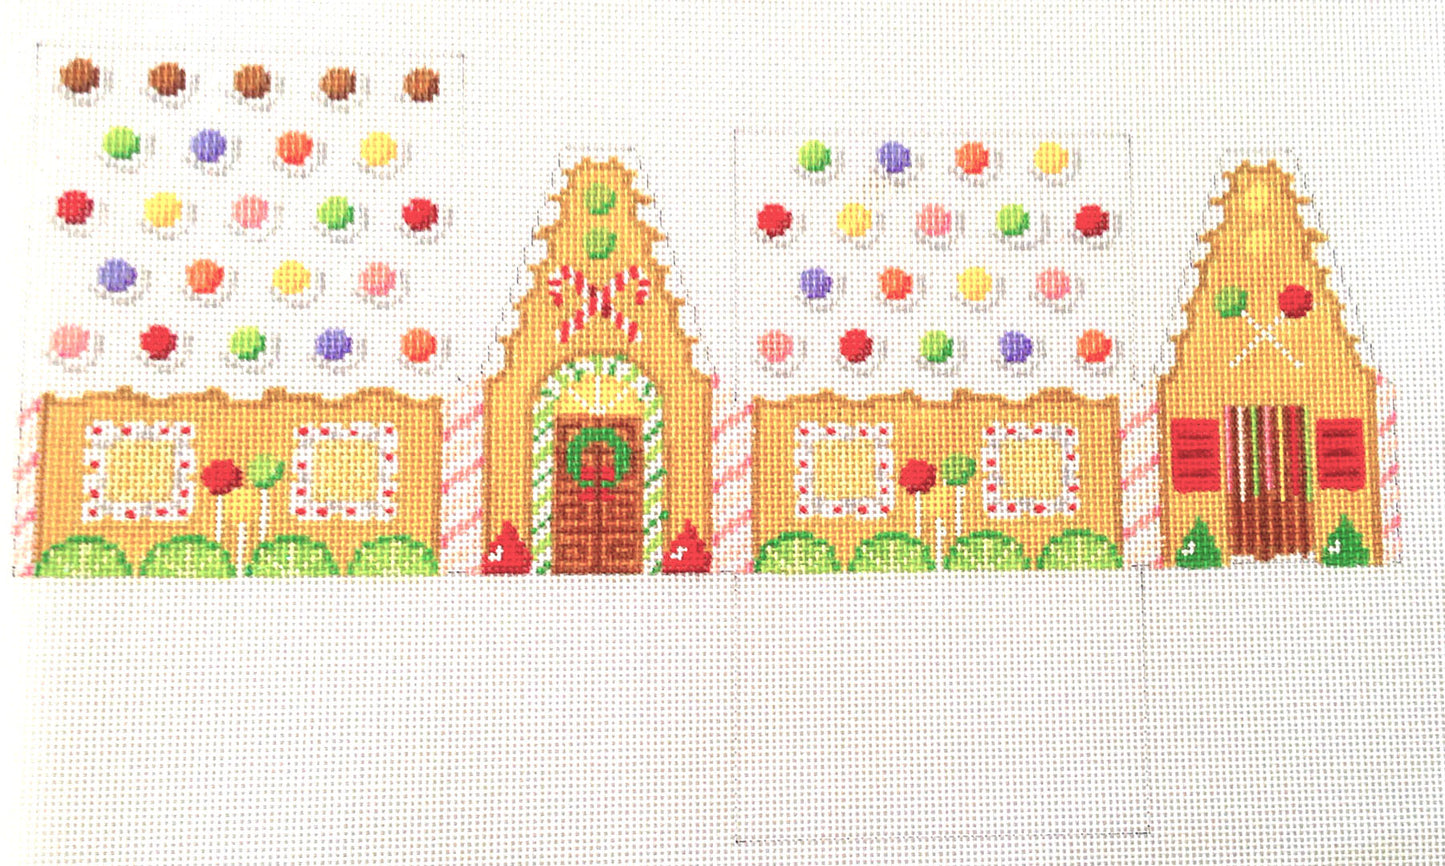 3-D Ornament ~ Skittles & Lime Slice 3-D Gingerbread House  Needlepoint Ornament by Susan Roberts